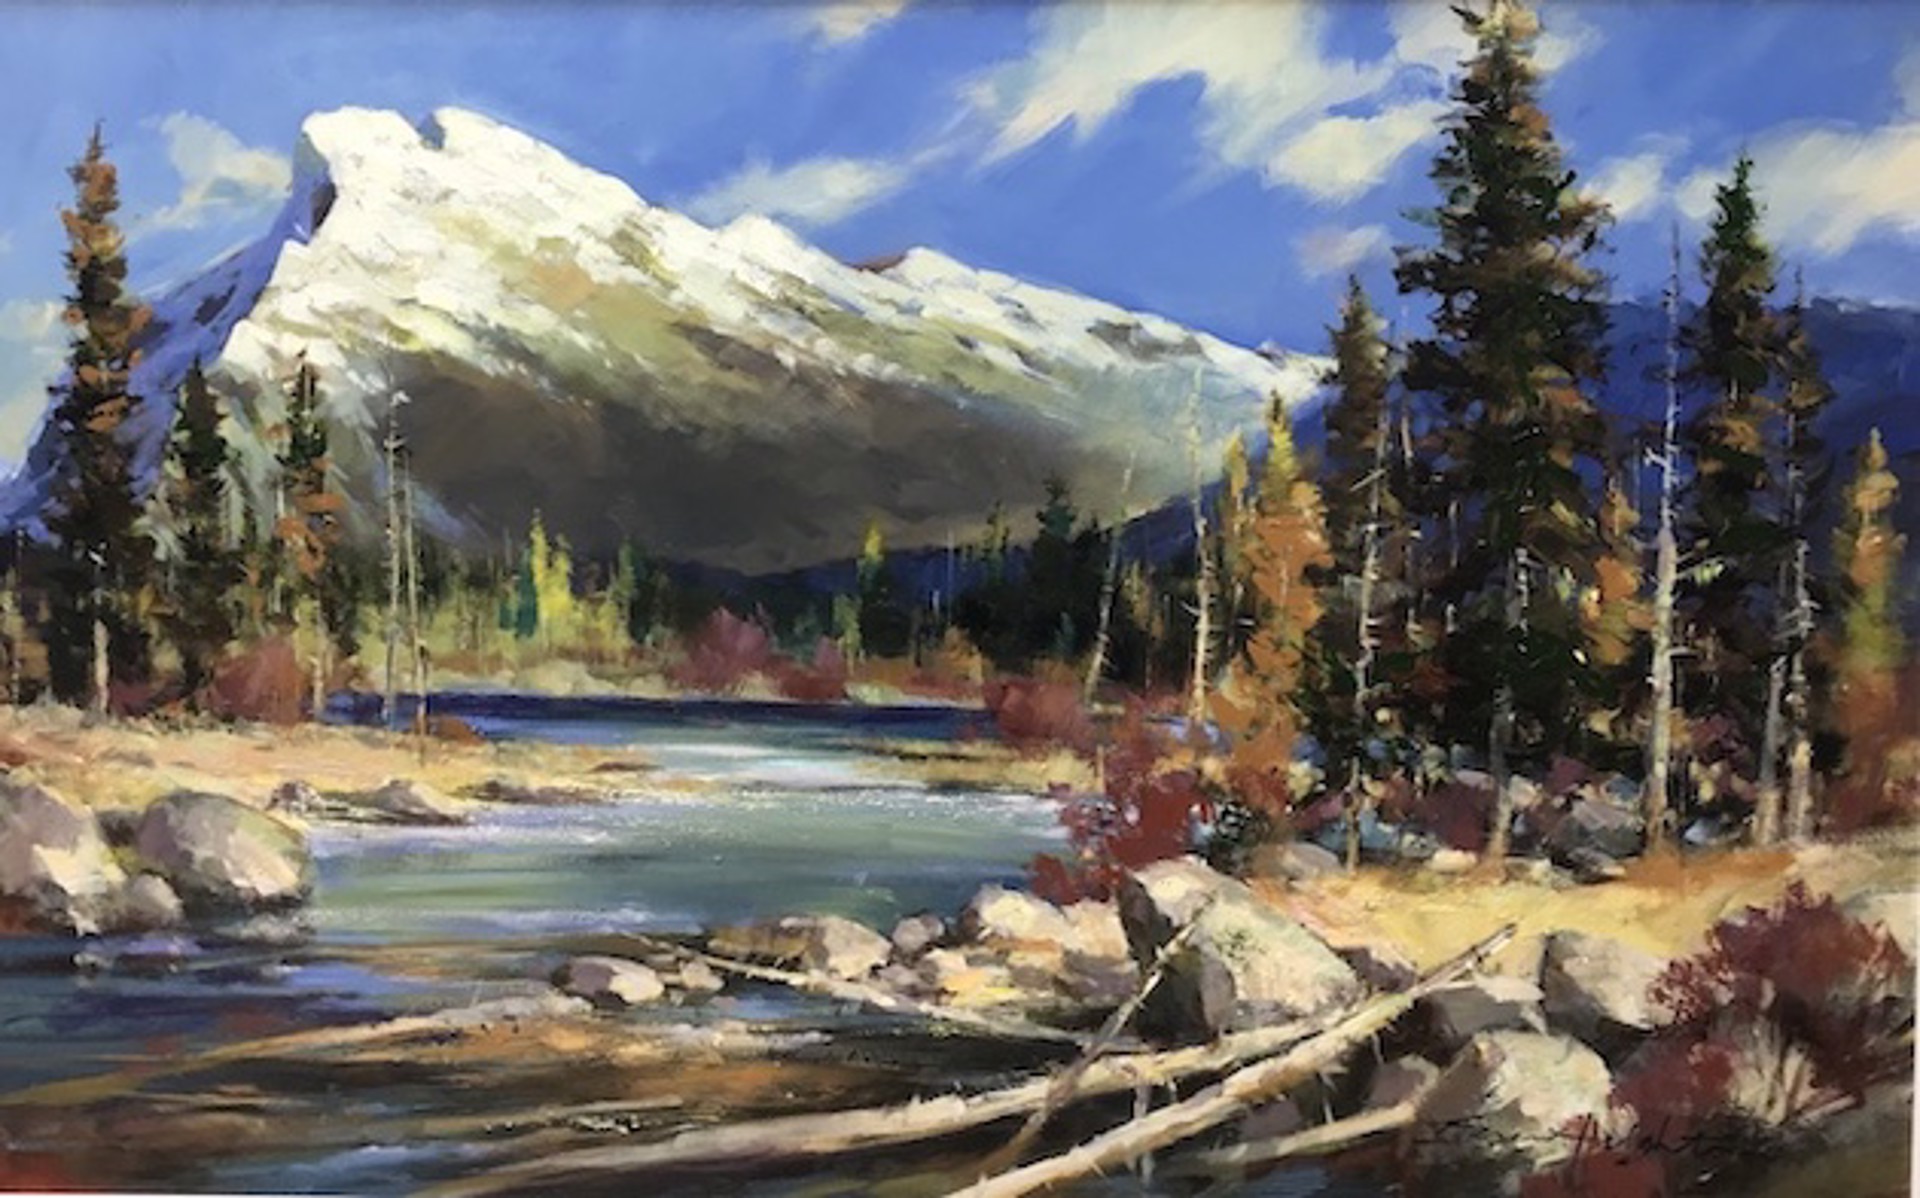 A View to Rundle by Brent Heighton